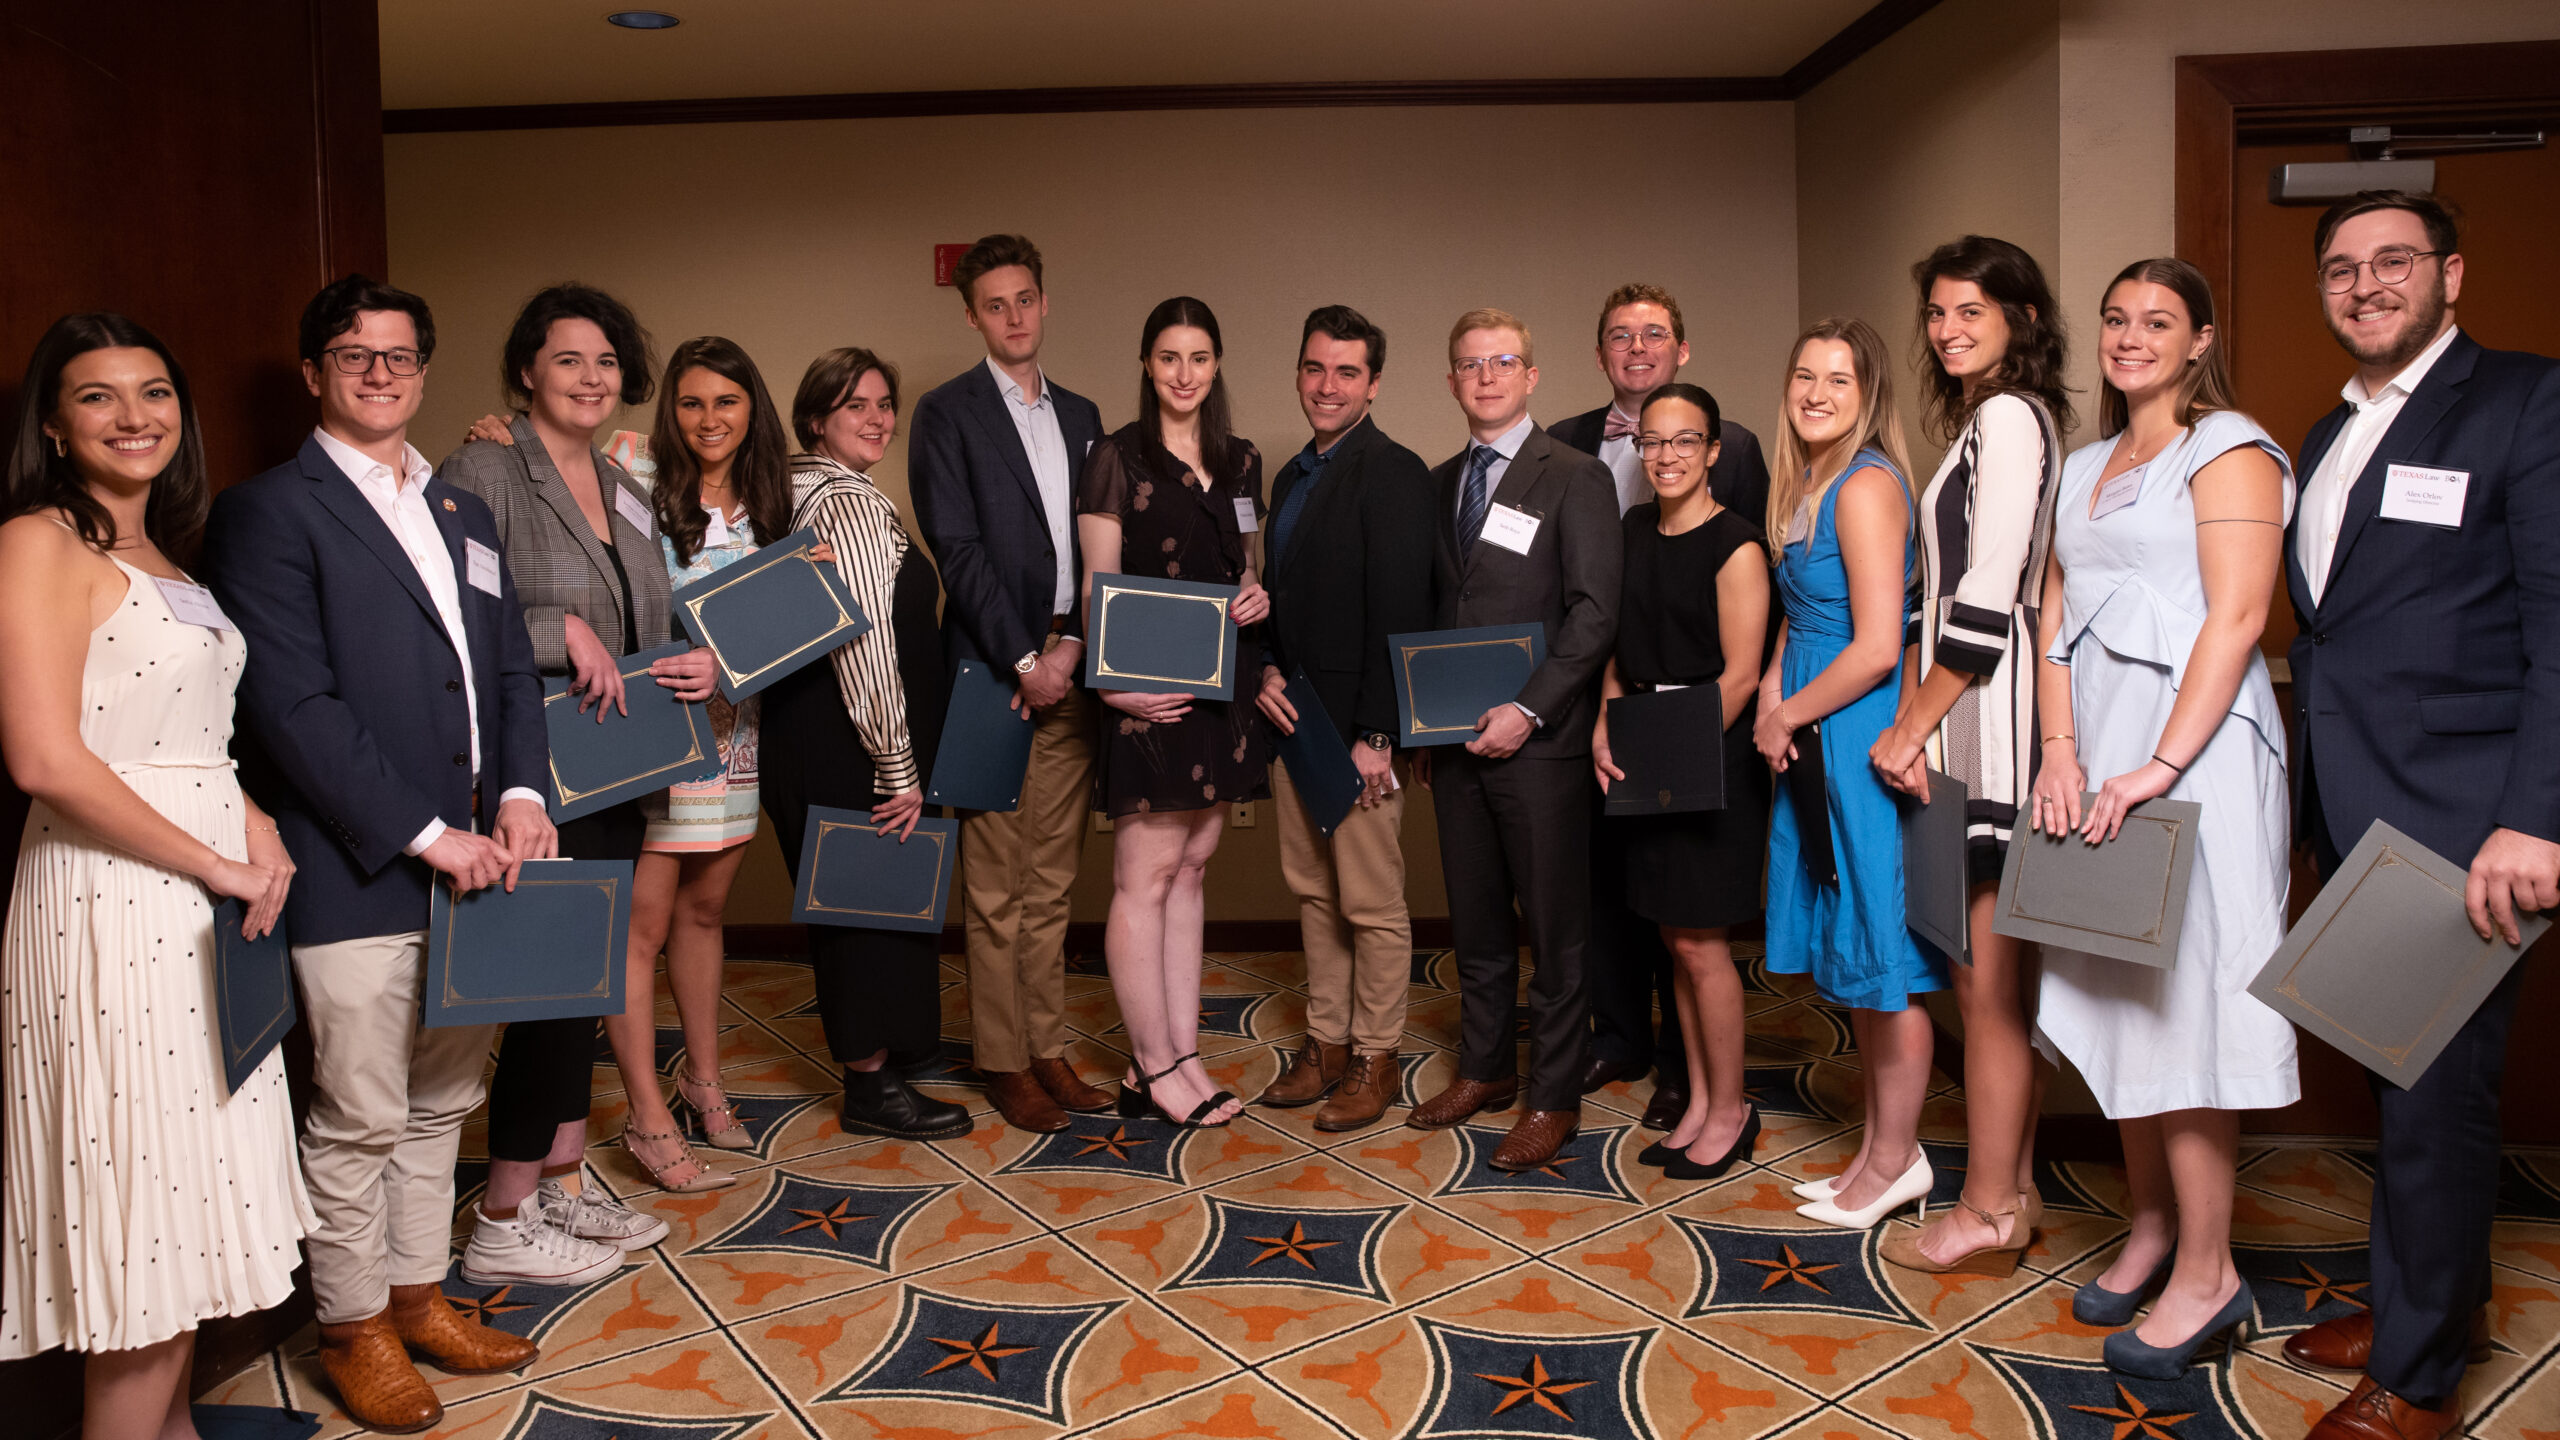 Scholarship recipients pose for a photo with their certificates at the 2023 Board of Advocates Banquet